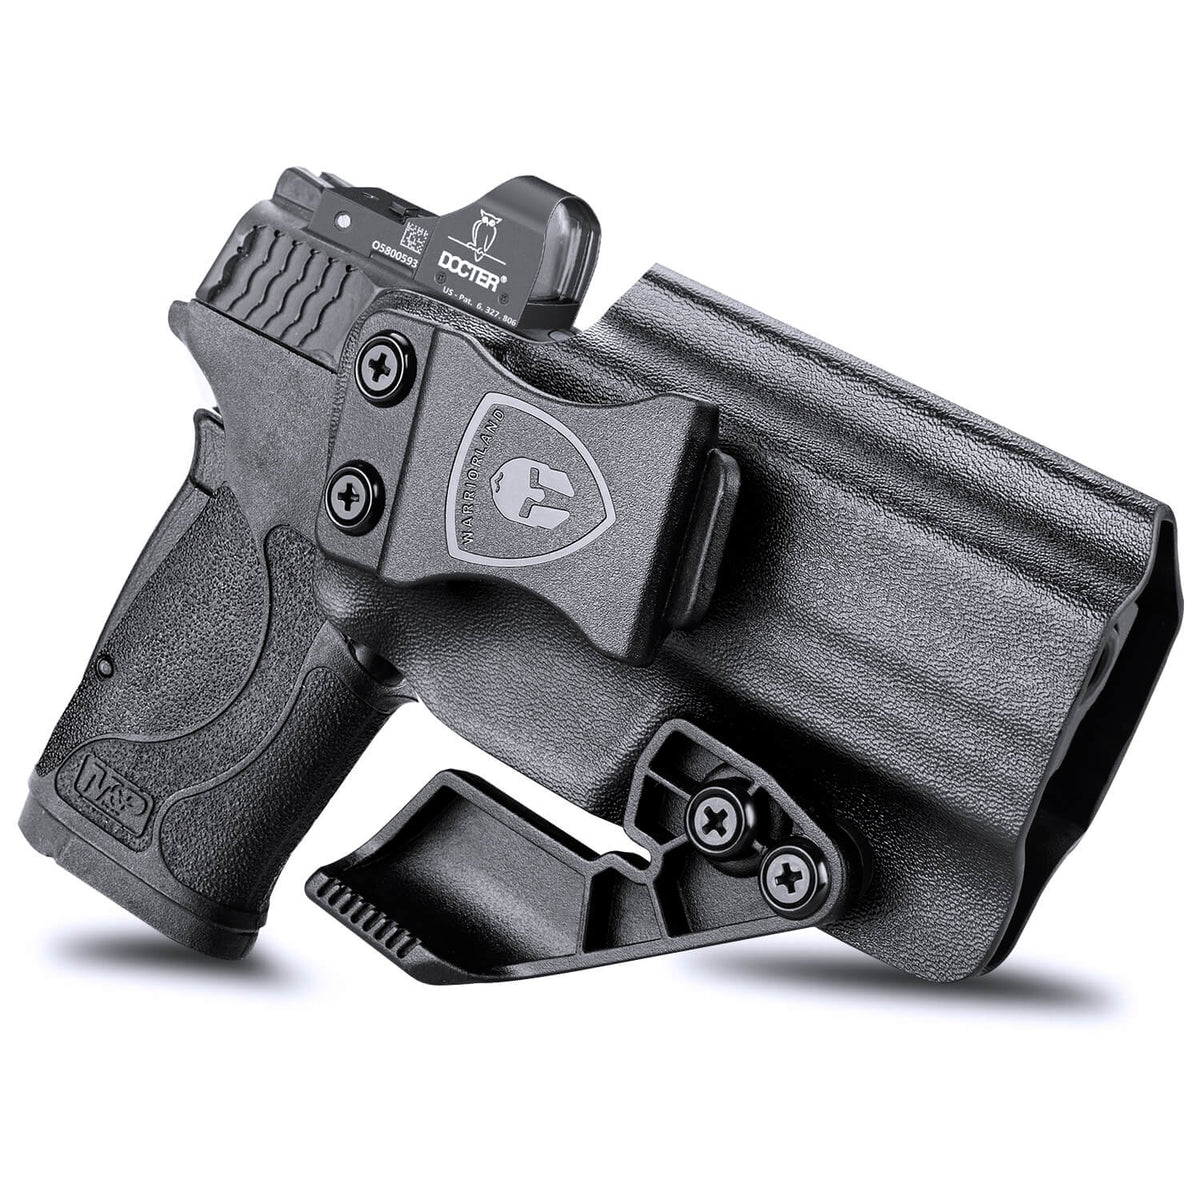 Smith & Wesson M&P Shield 9mm 380 EZ Kydex IWB Holster with Claw  for Fat Guys | WARRIORLAND